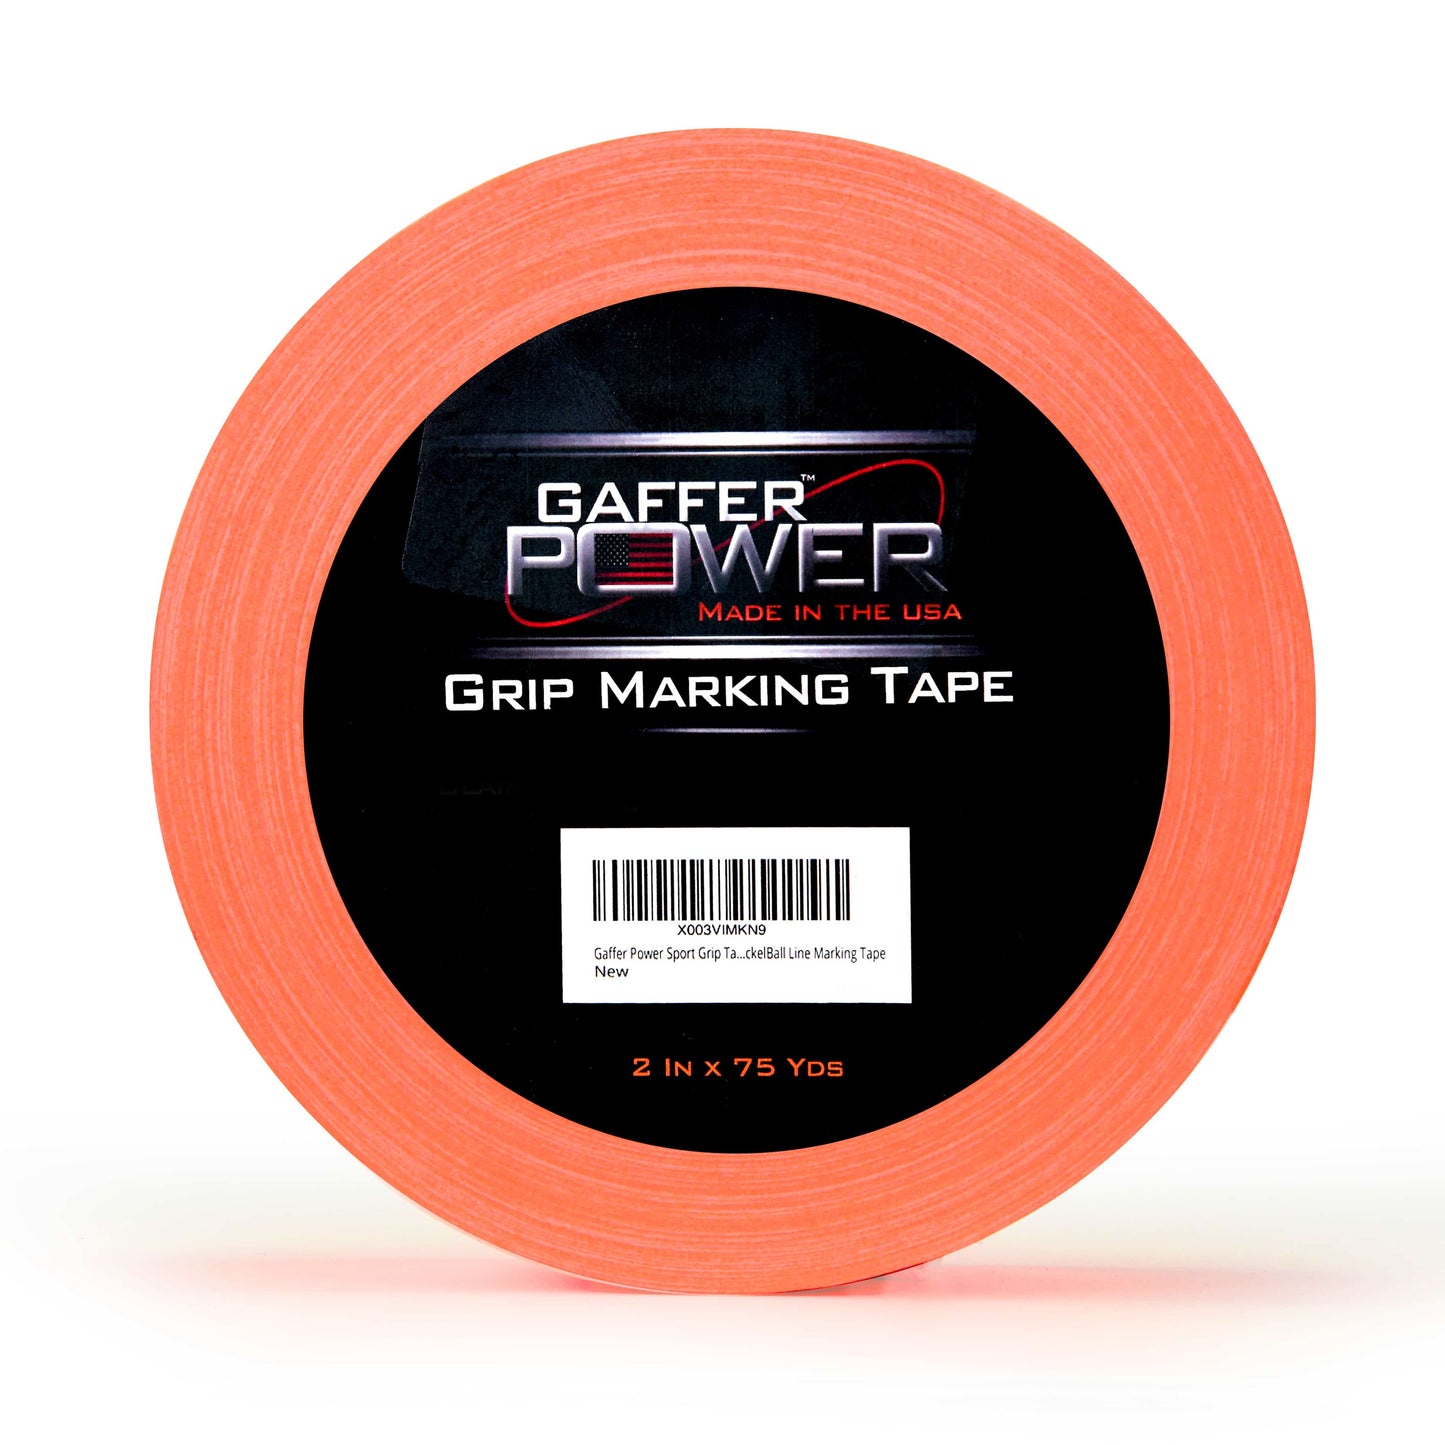 Professional USA Made PickelBall Line Marking Tape and grip tape, 2 Inch x 75 Yds, Fluorescent Orange